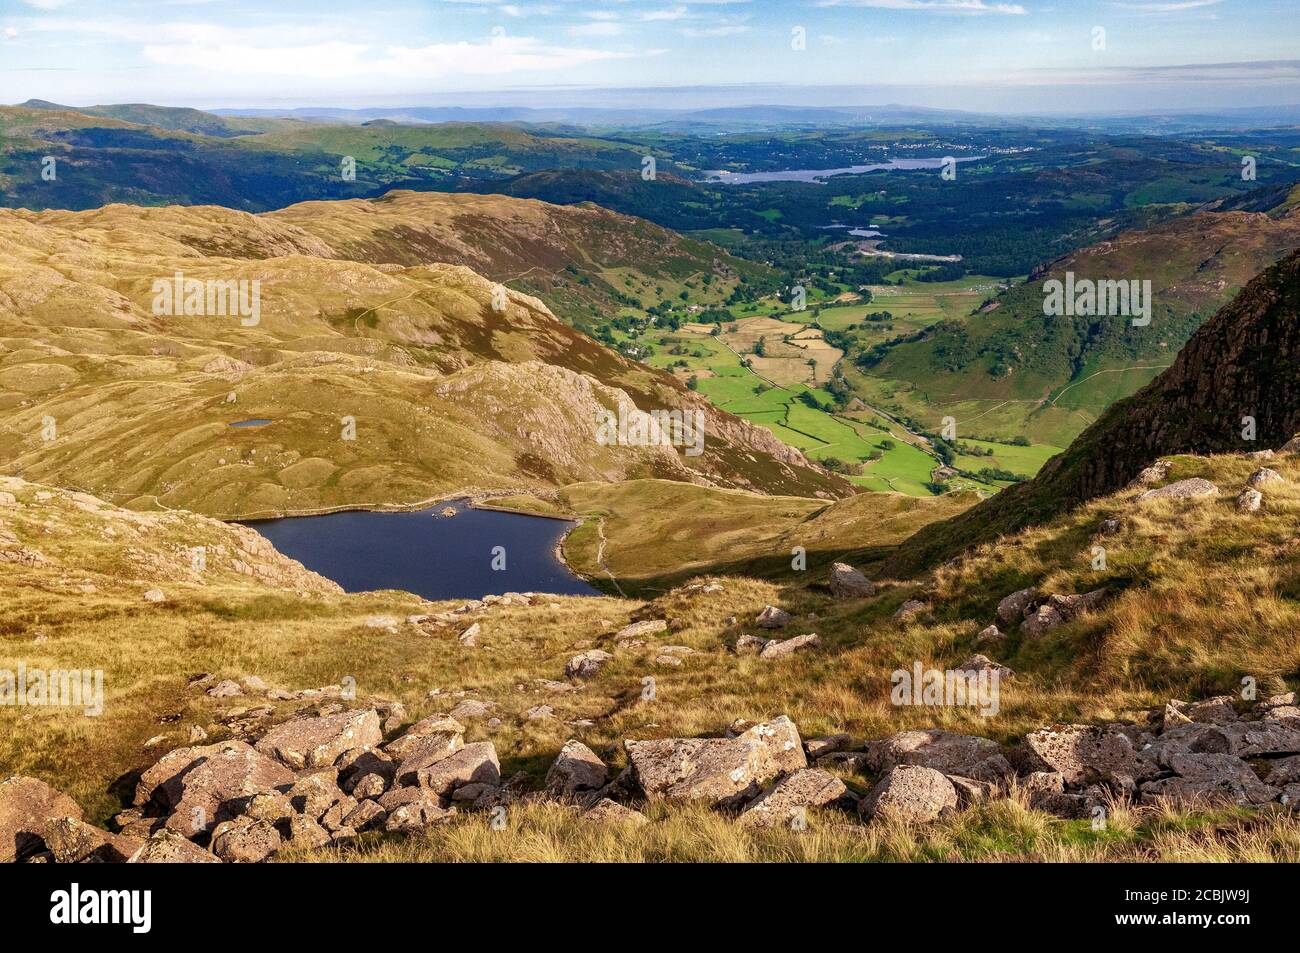 Sticlke Tarn seen from Pavey Ark fell in the Langdales with the Langdale valley green fields and Lake Windermere in the distance. Stock Photo